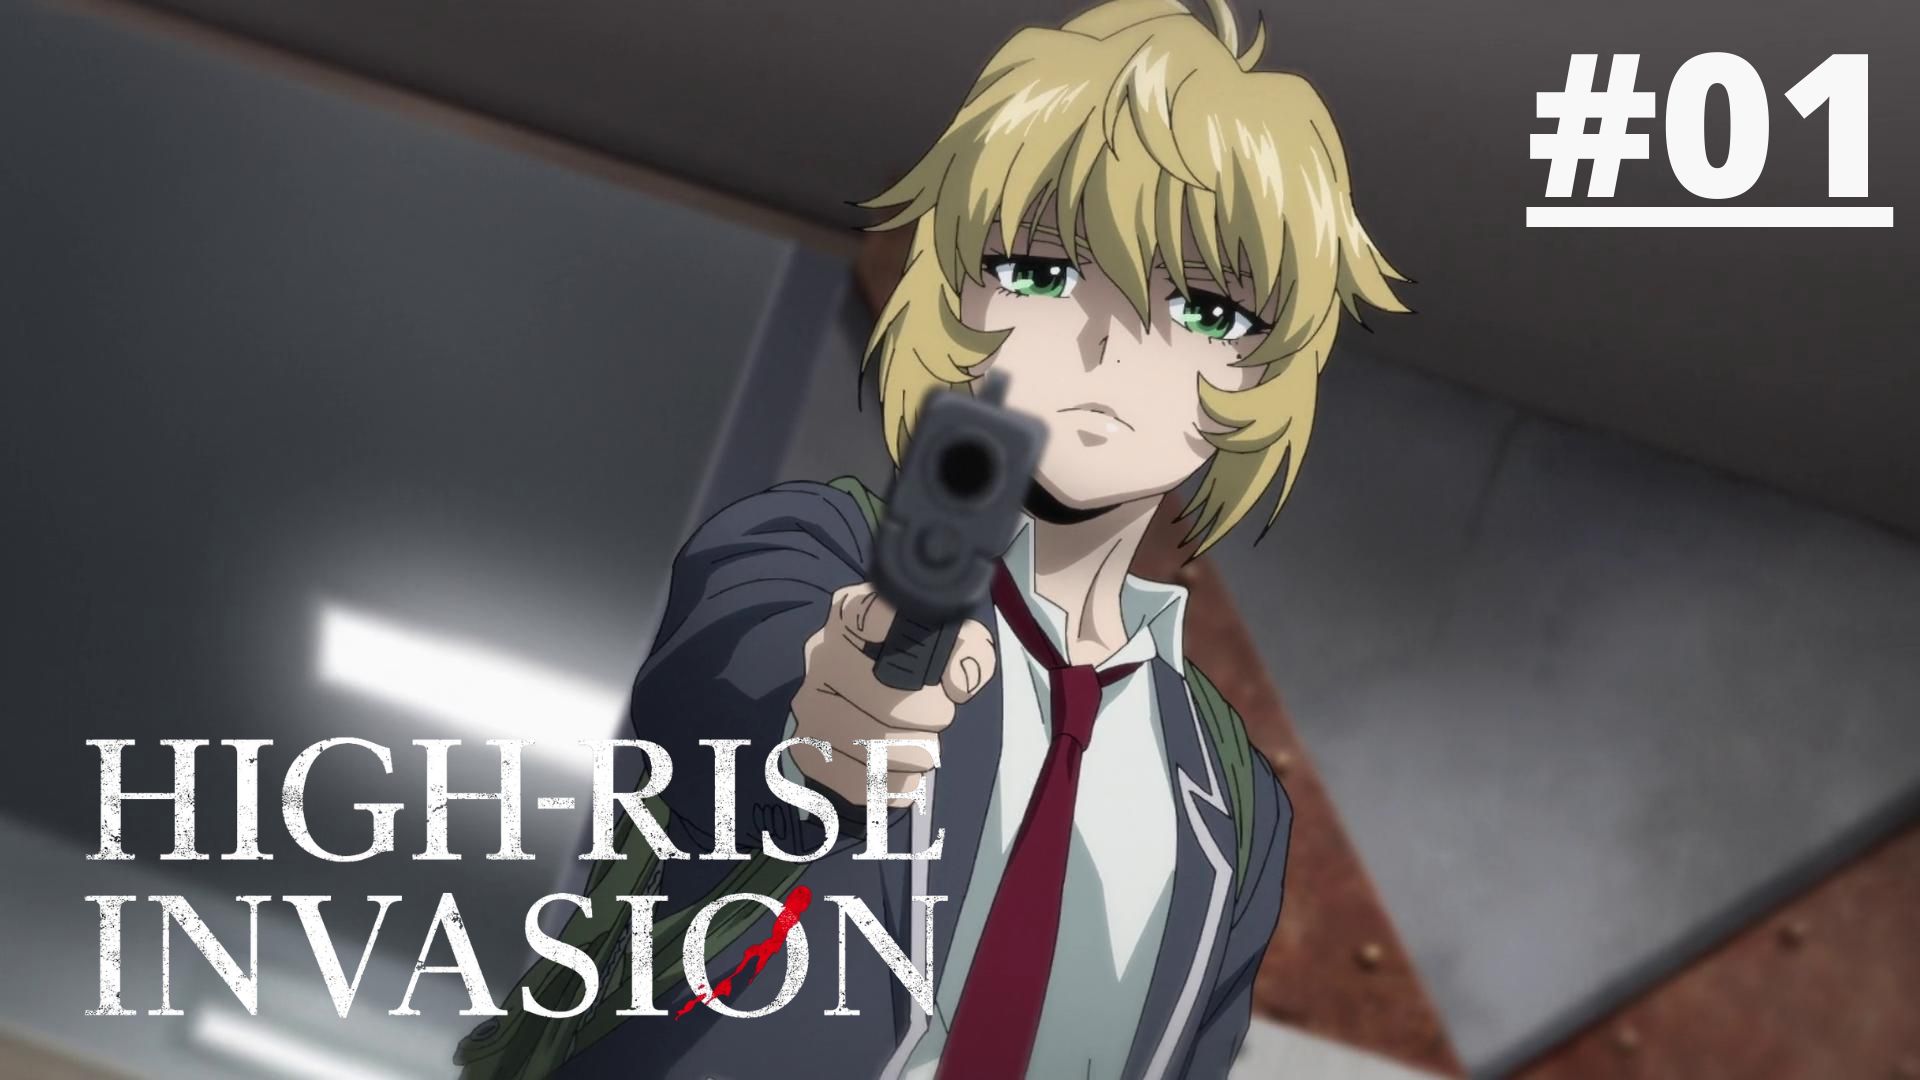 HighRise Invasion The Animes Biggest Changes From the Manga